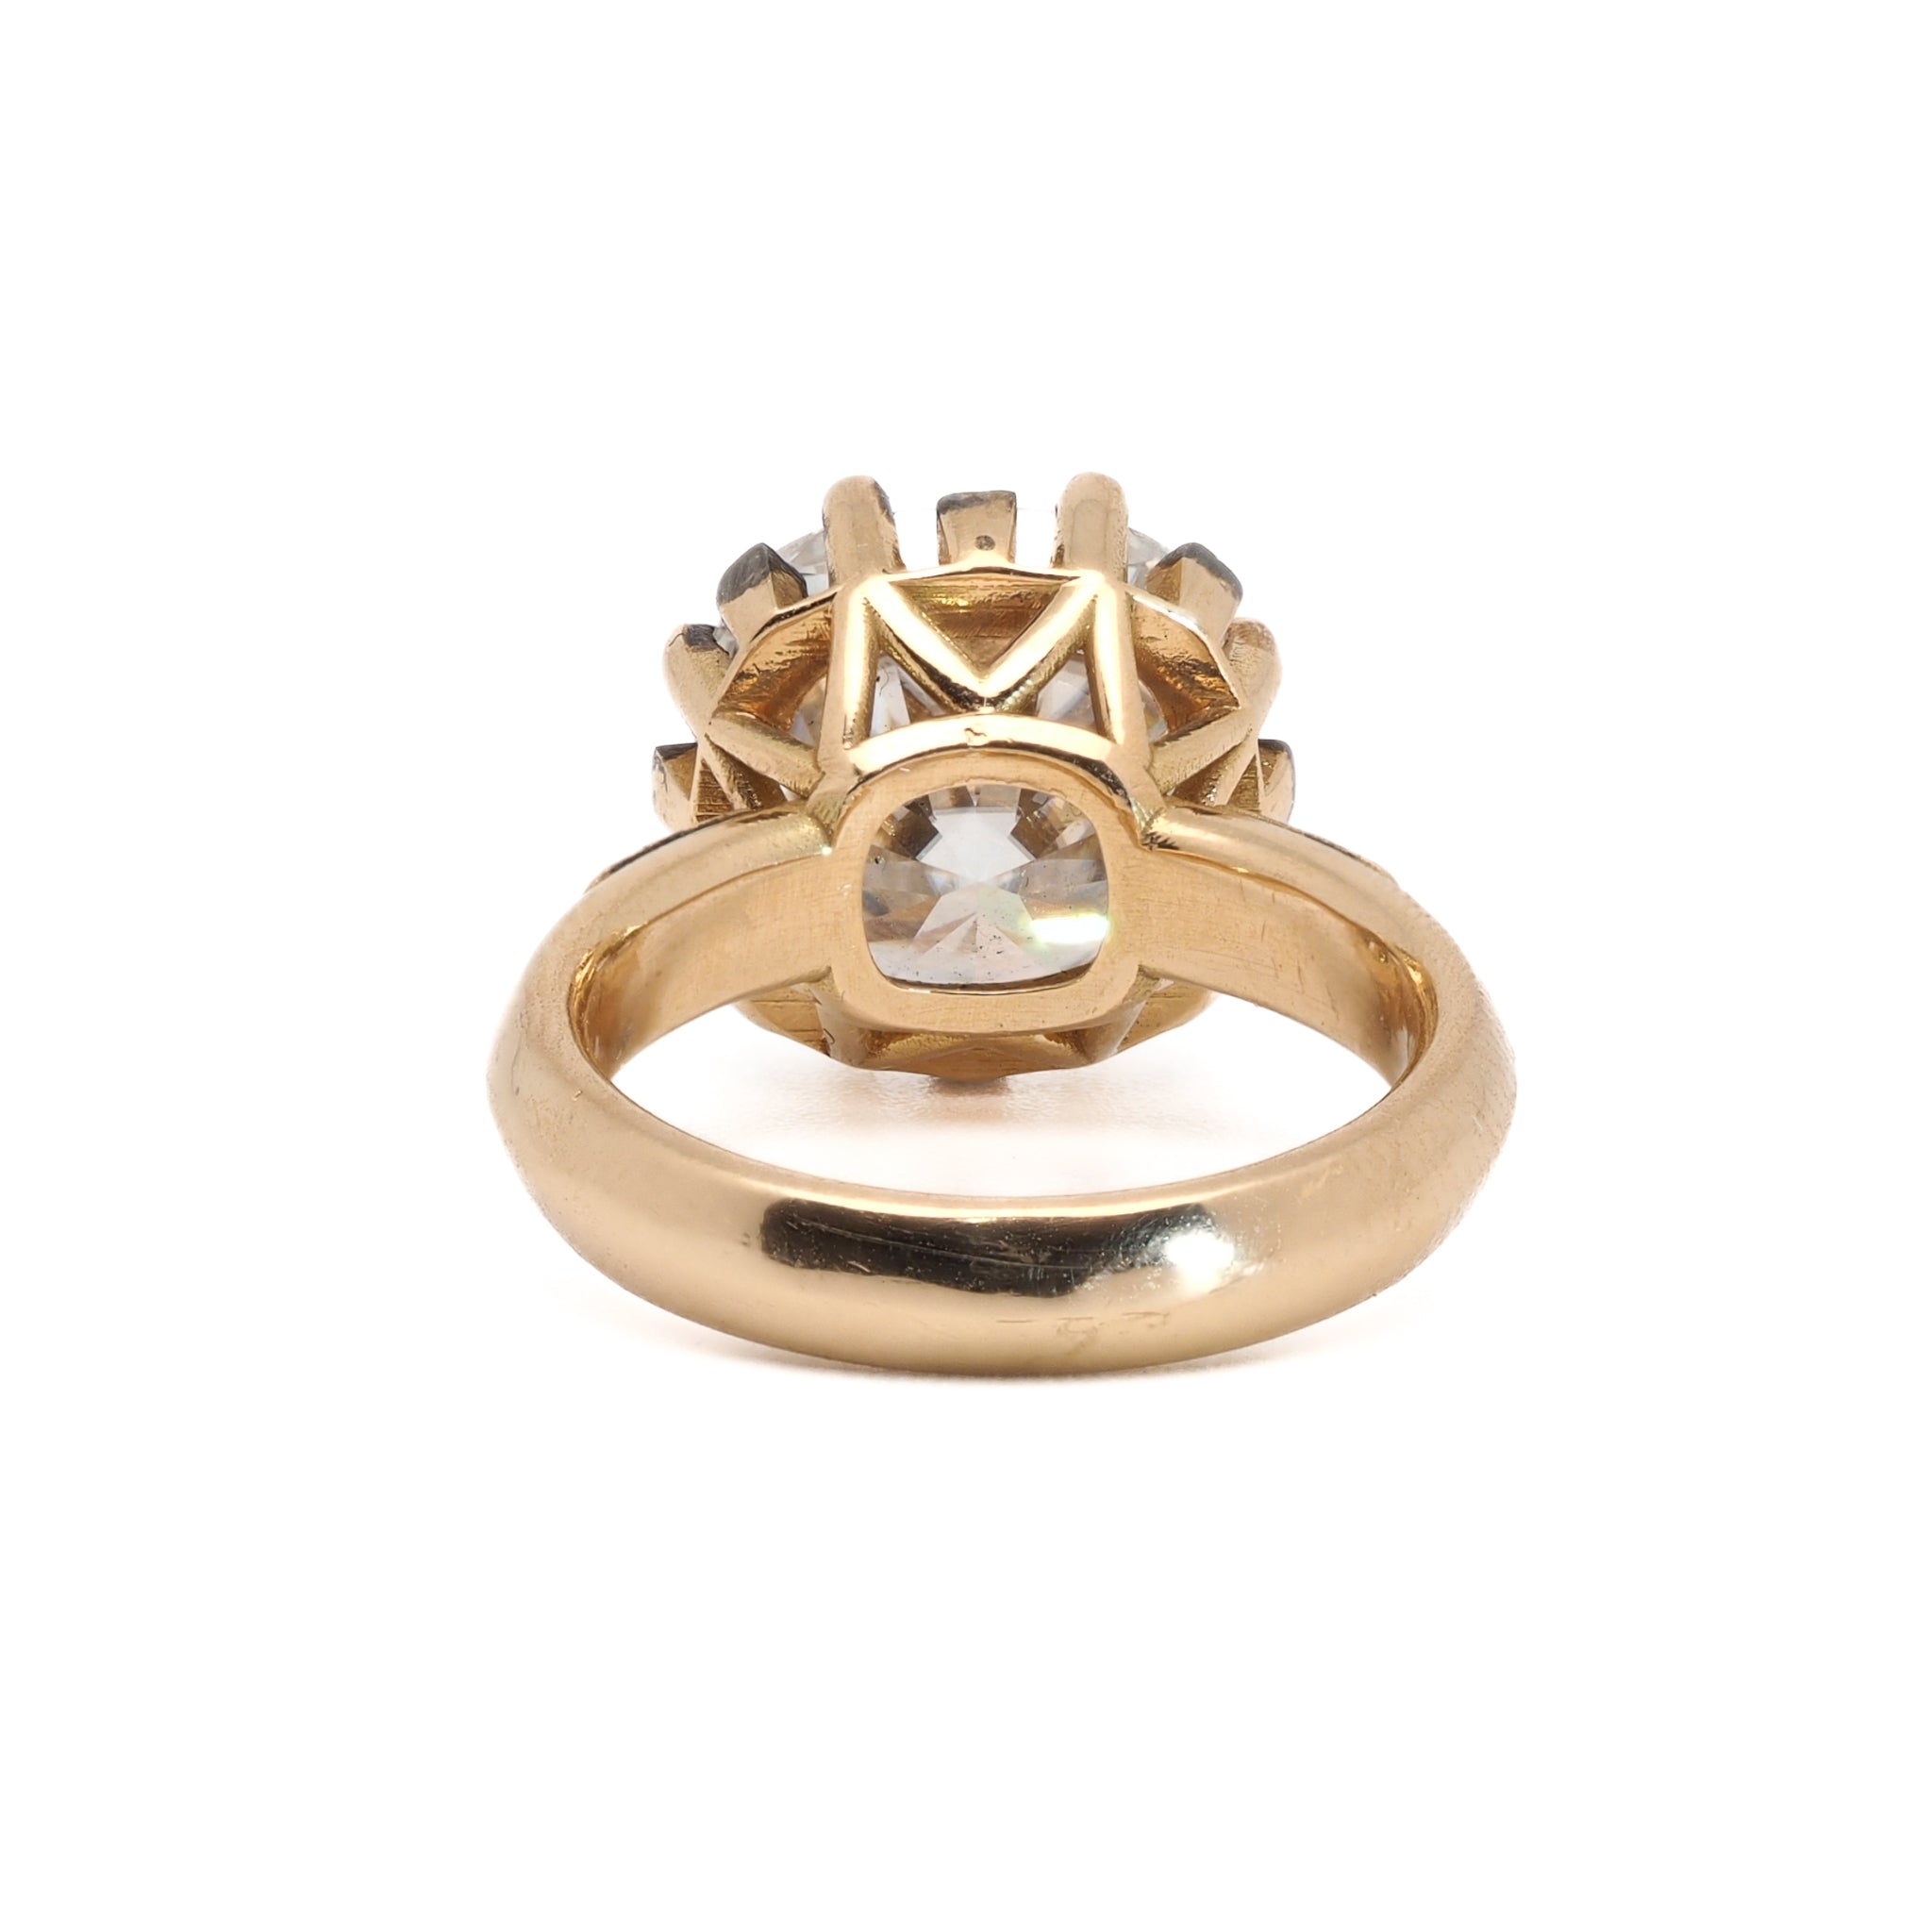 Handmade Fine Jewelry - 18k Gold Ring with a stunning 7ct Moissanite gemstone.